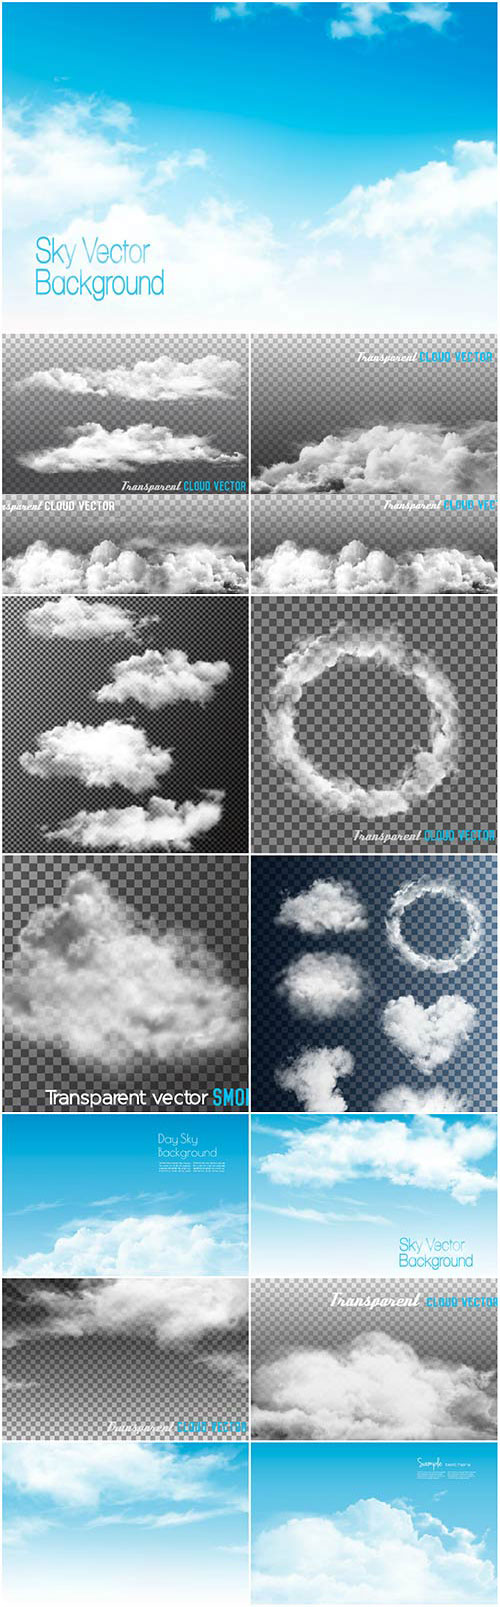 Clouds, storm clouds, sky vector illustration